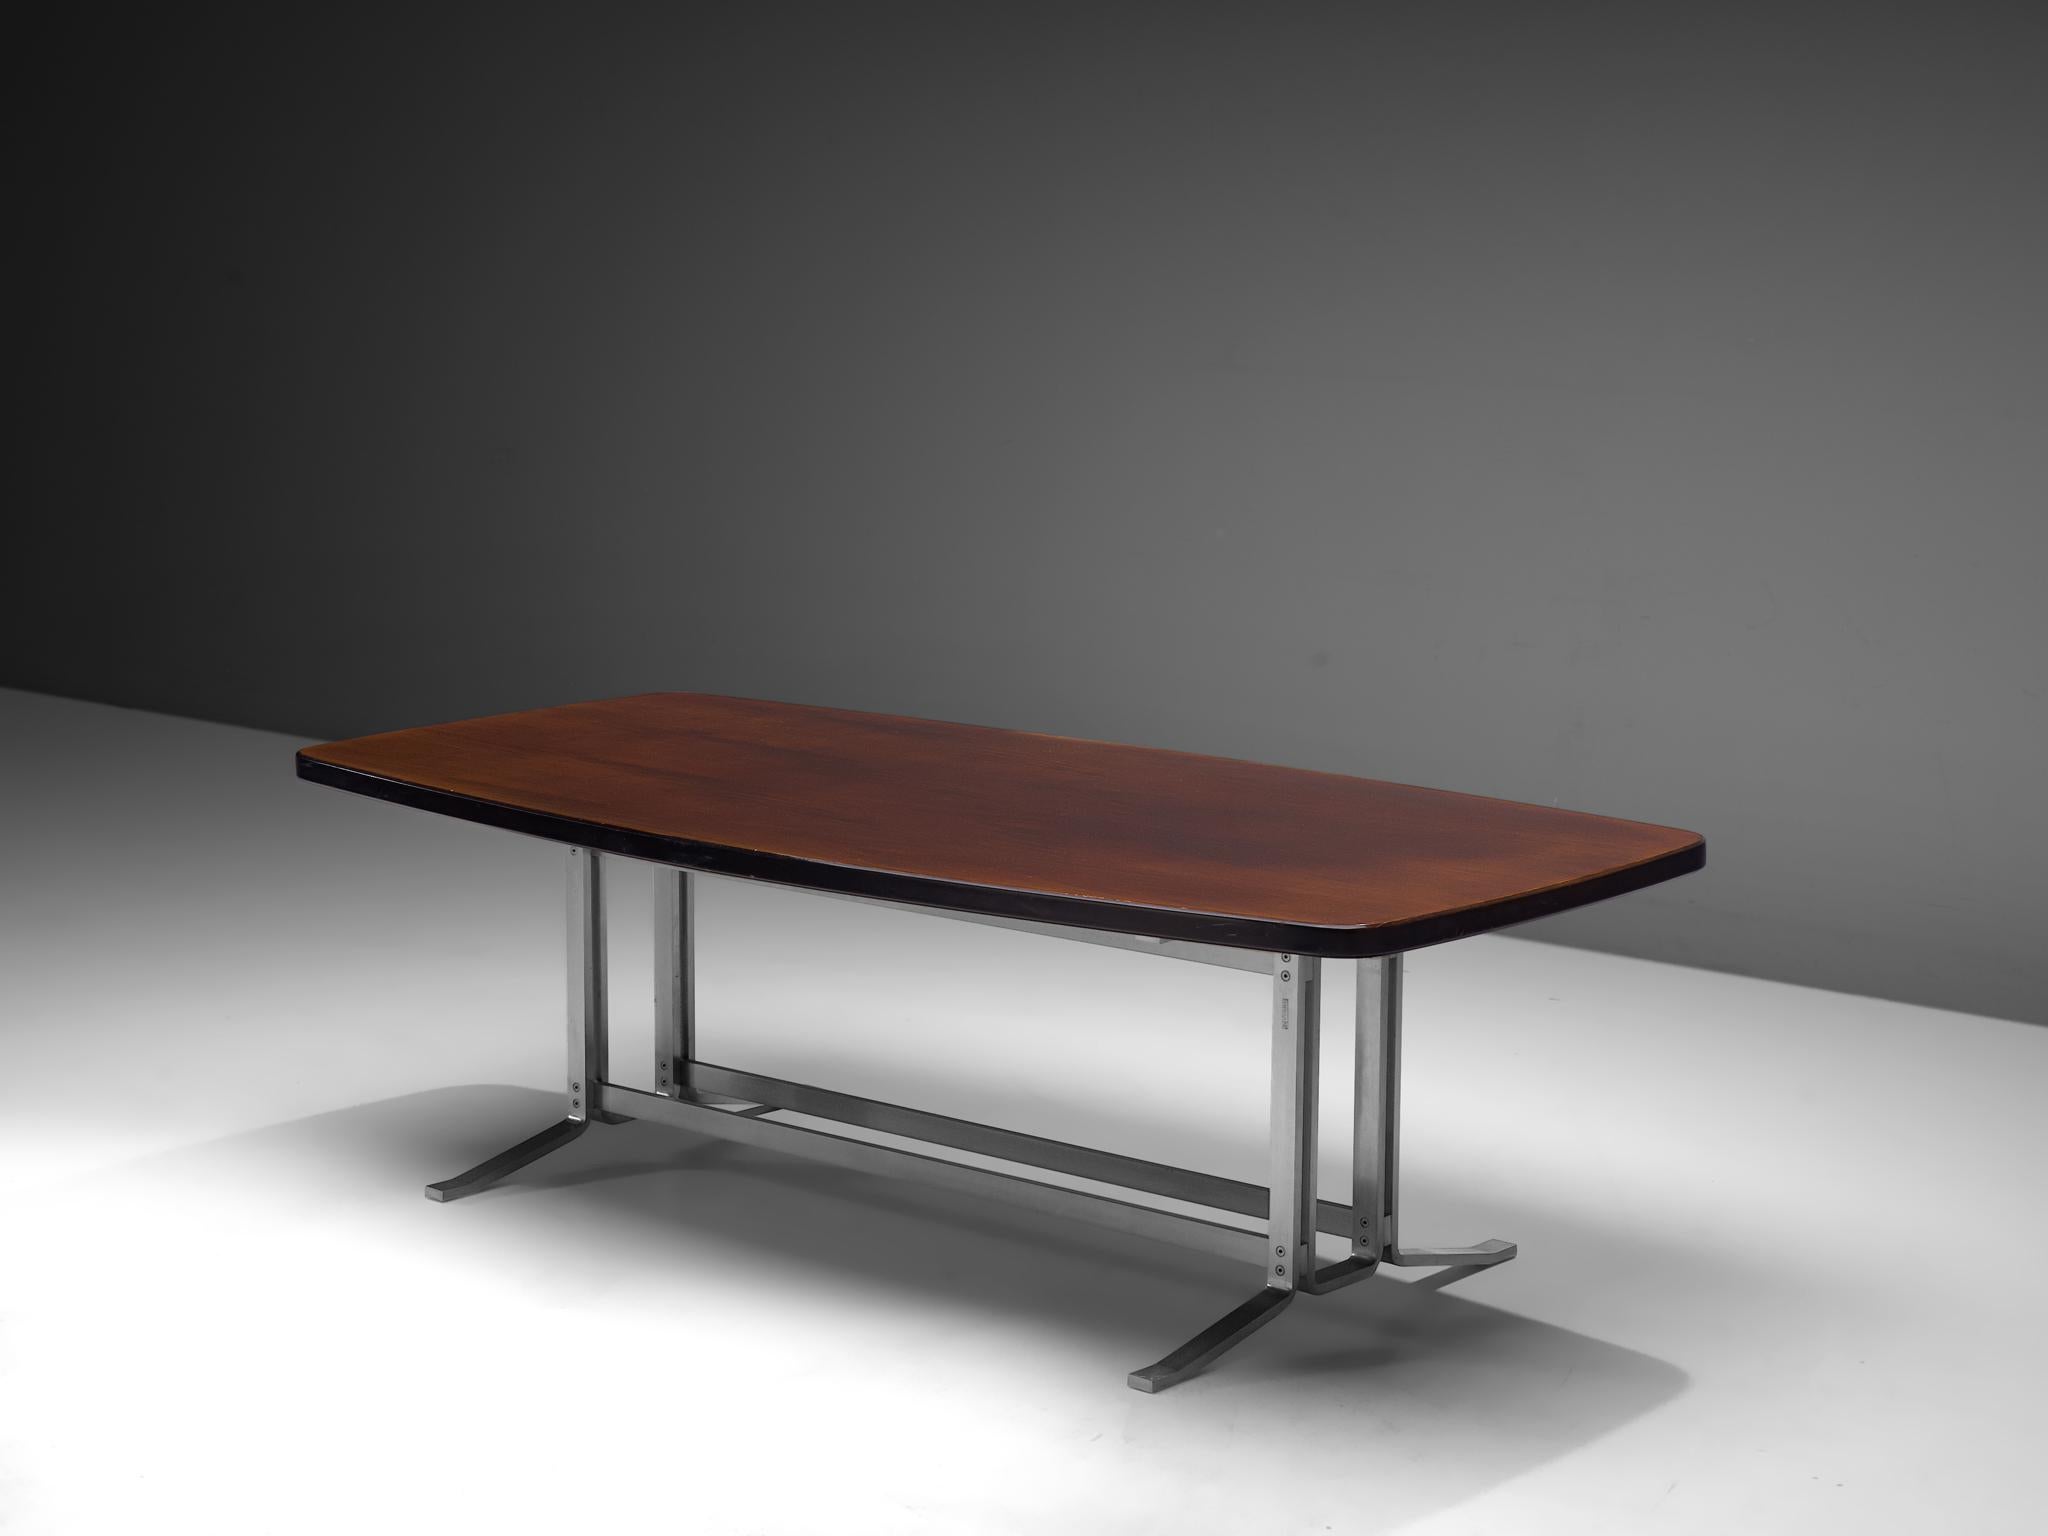 Gianni Moscatelli for Formanova, dining table, steel and mahogany, Italy, 1960s.

1960s Formanova table or desk by Gianni Moscatelli. The piece features a boat shaped table top, resting on a modest and architectural chromed frame. The lacquered wood